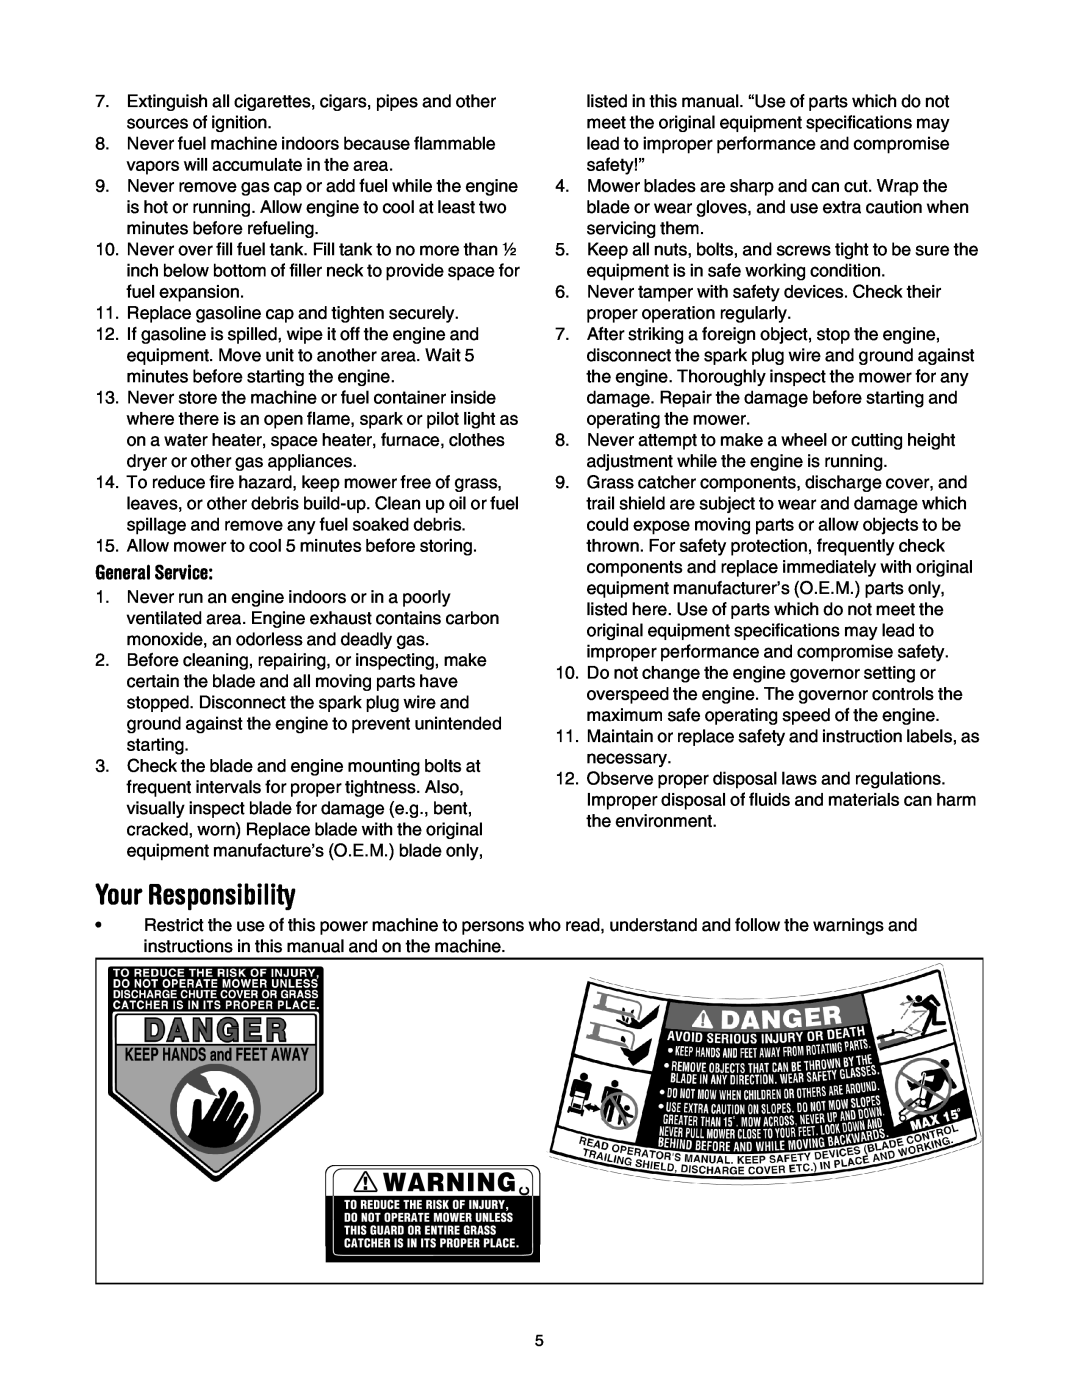 MTD 549 manual Your Responsibility, General Service 